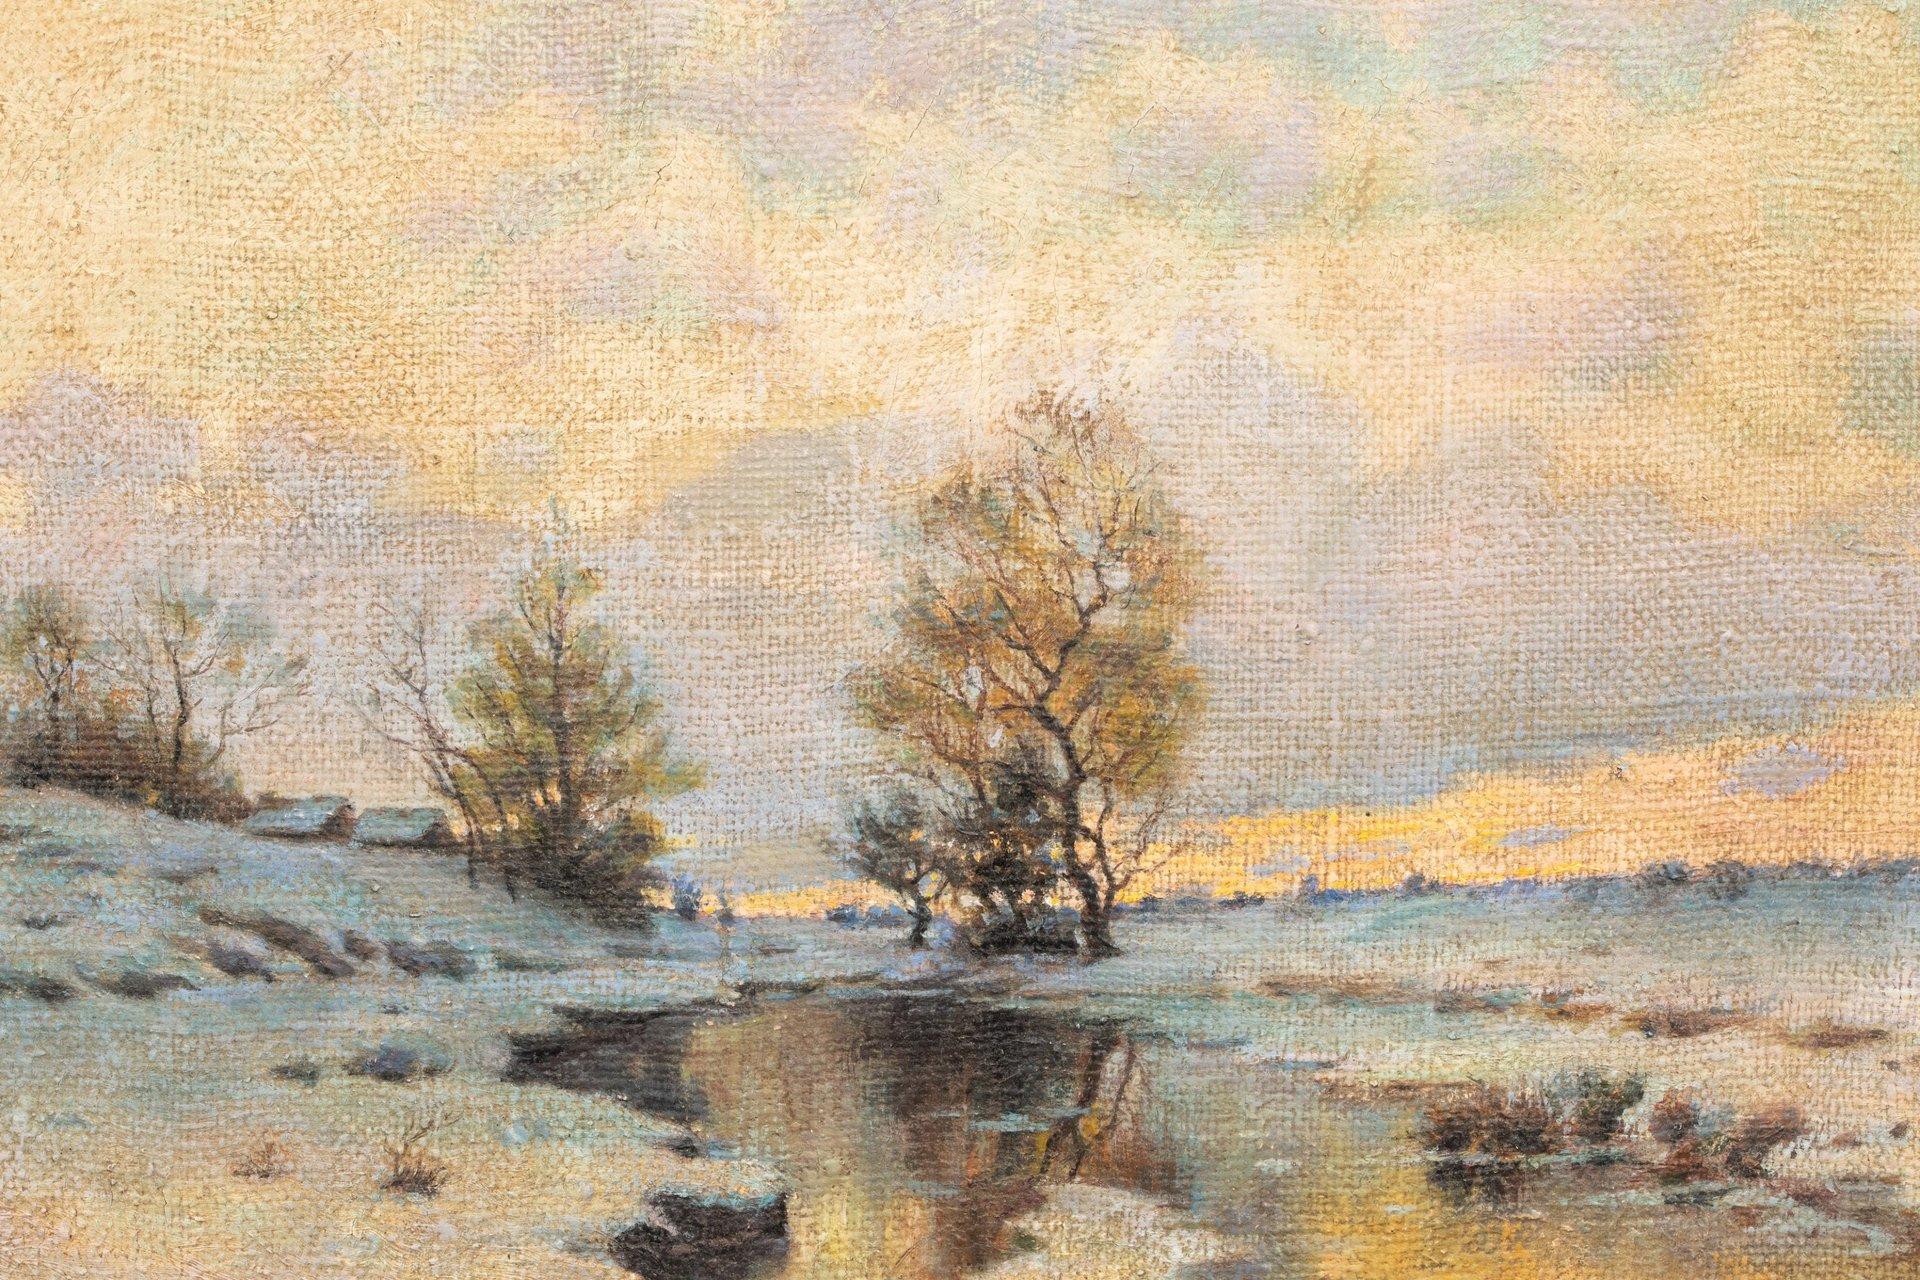 Early spring (Sketch), oil on jute by Endogurov Ivan Ivanovich (1861-1898) For Sale 11